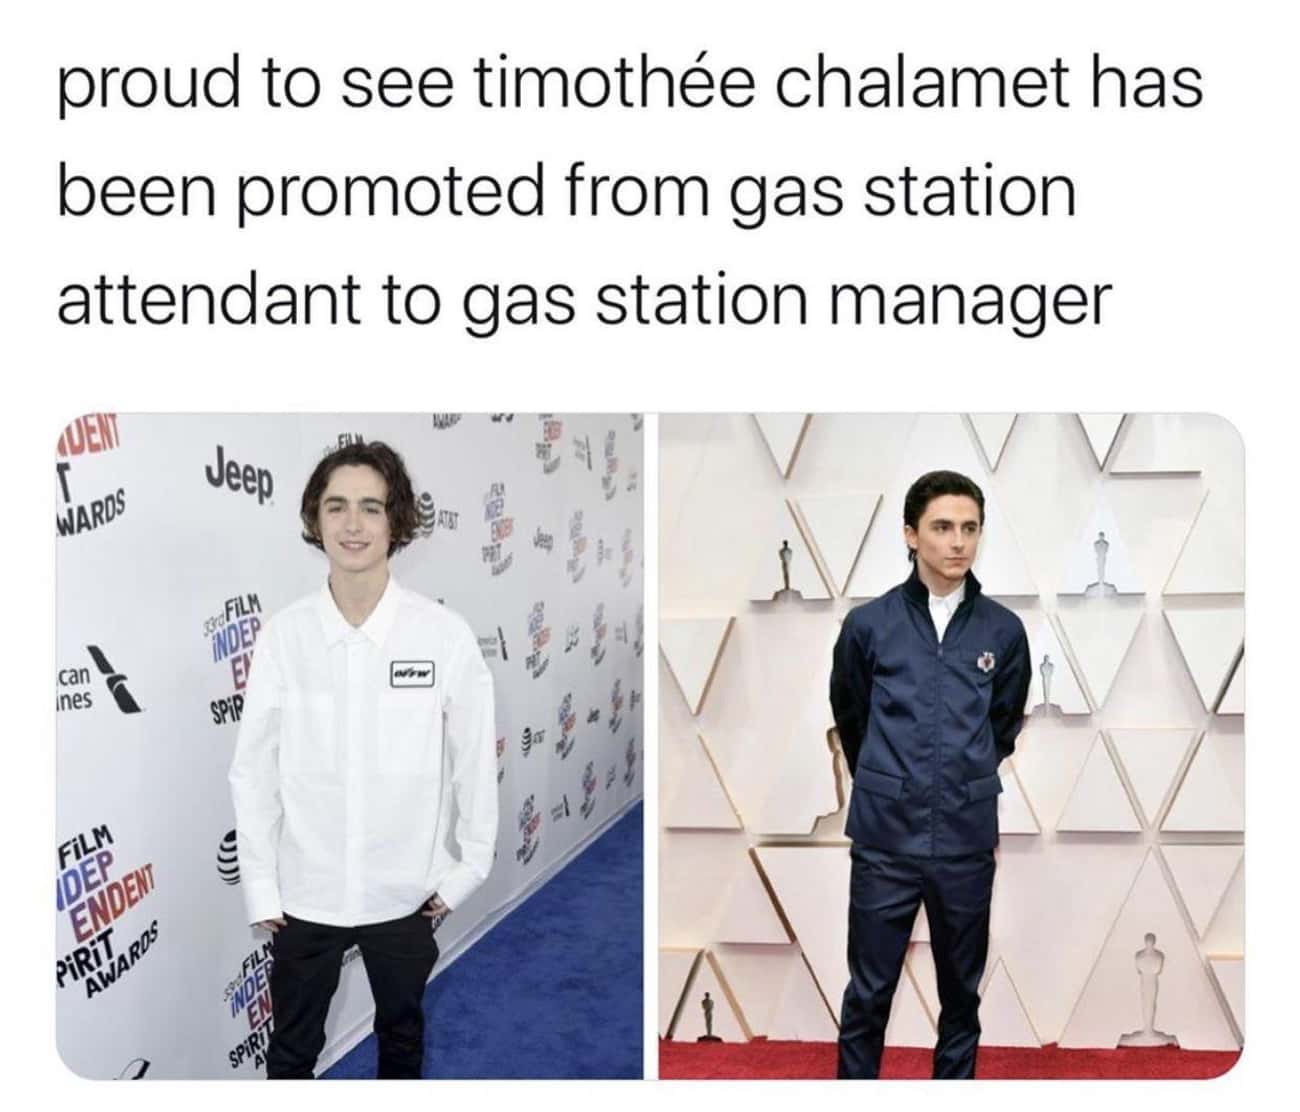 He's Been Promoted!